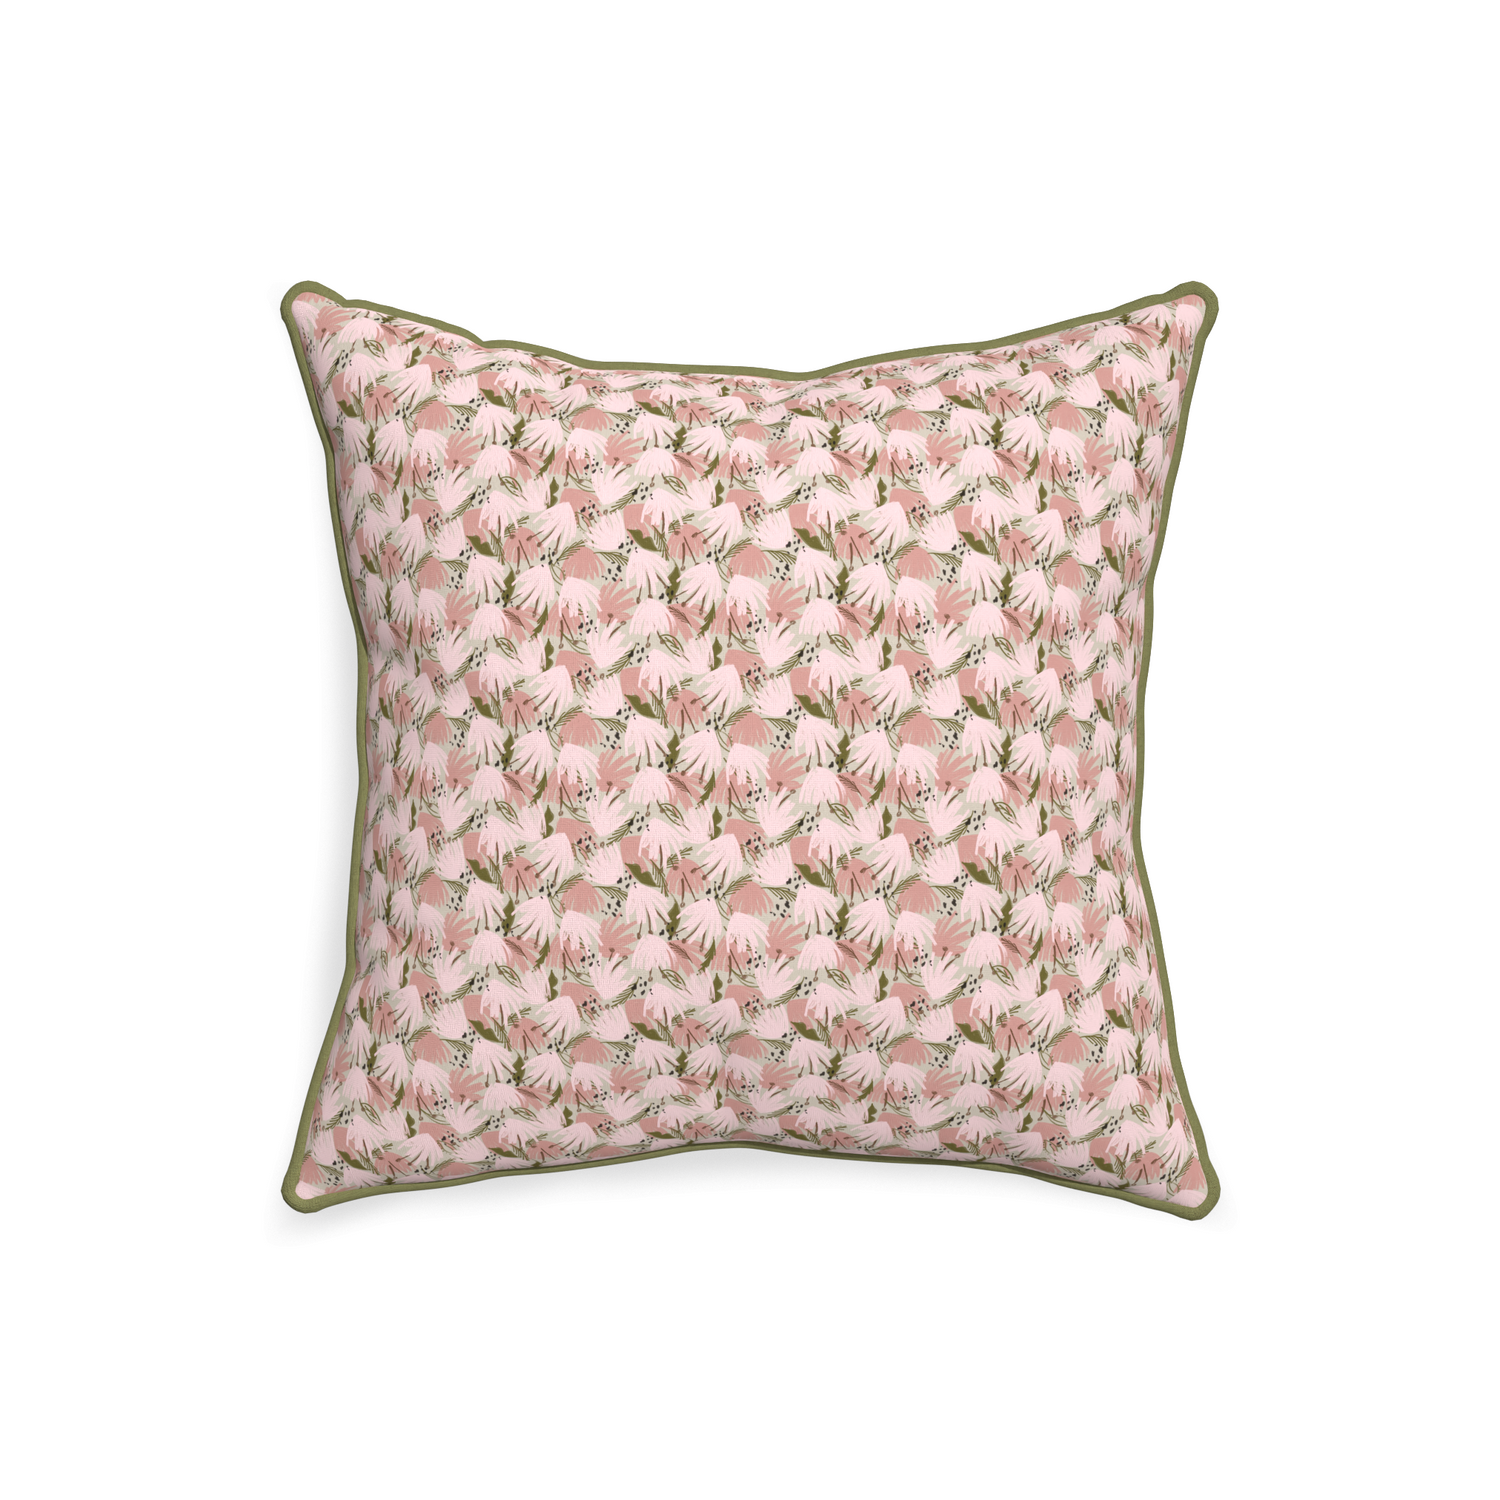 20-square eden pink custom pillow with moss piping on white background